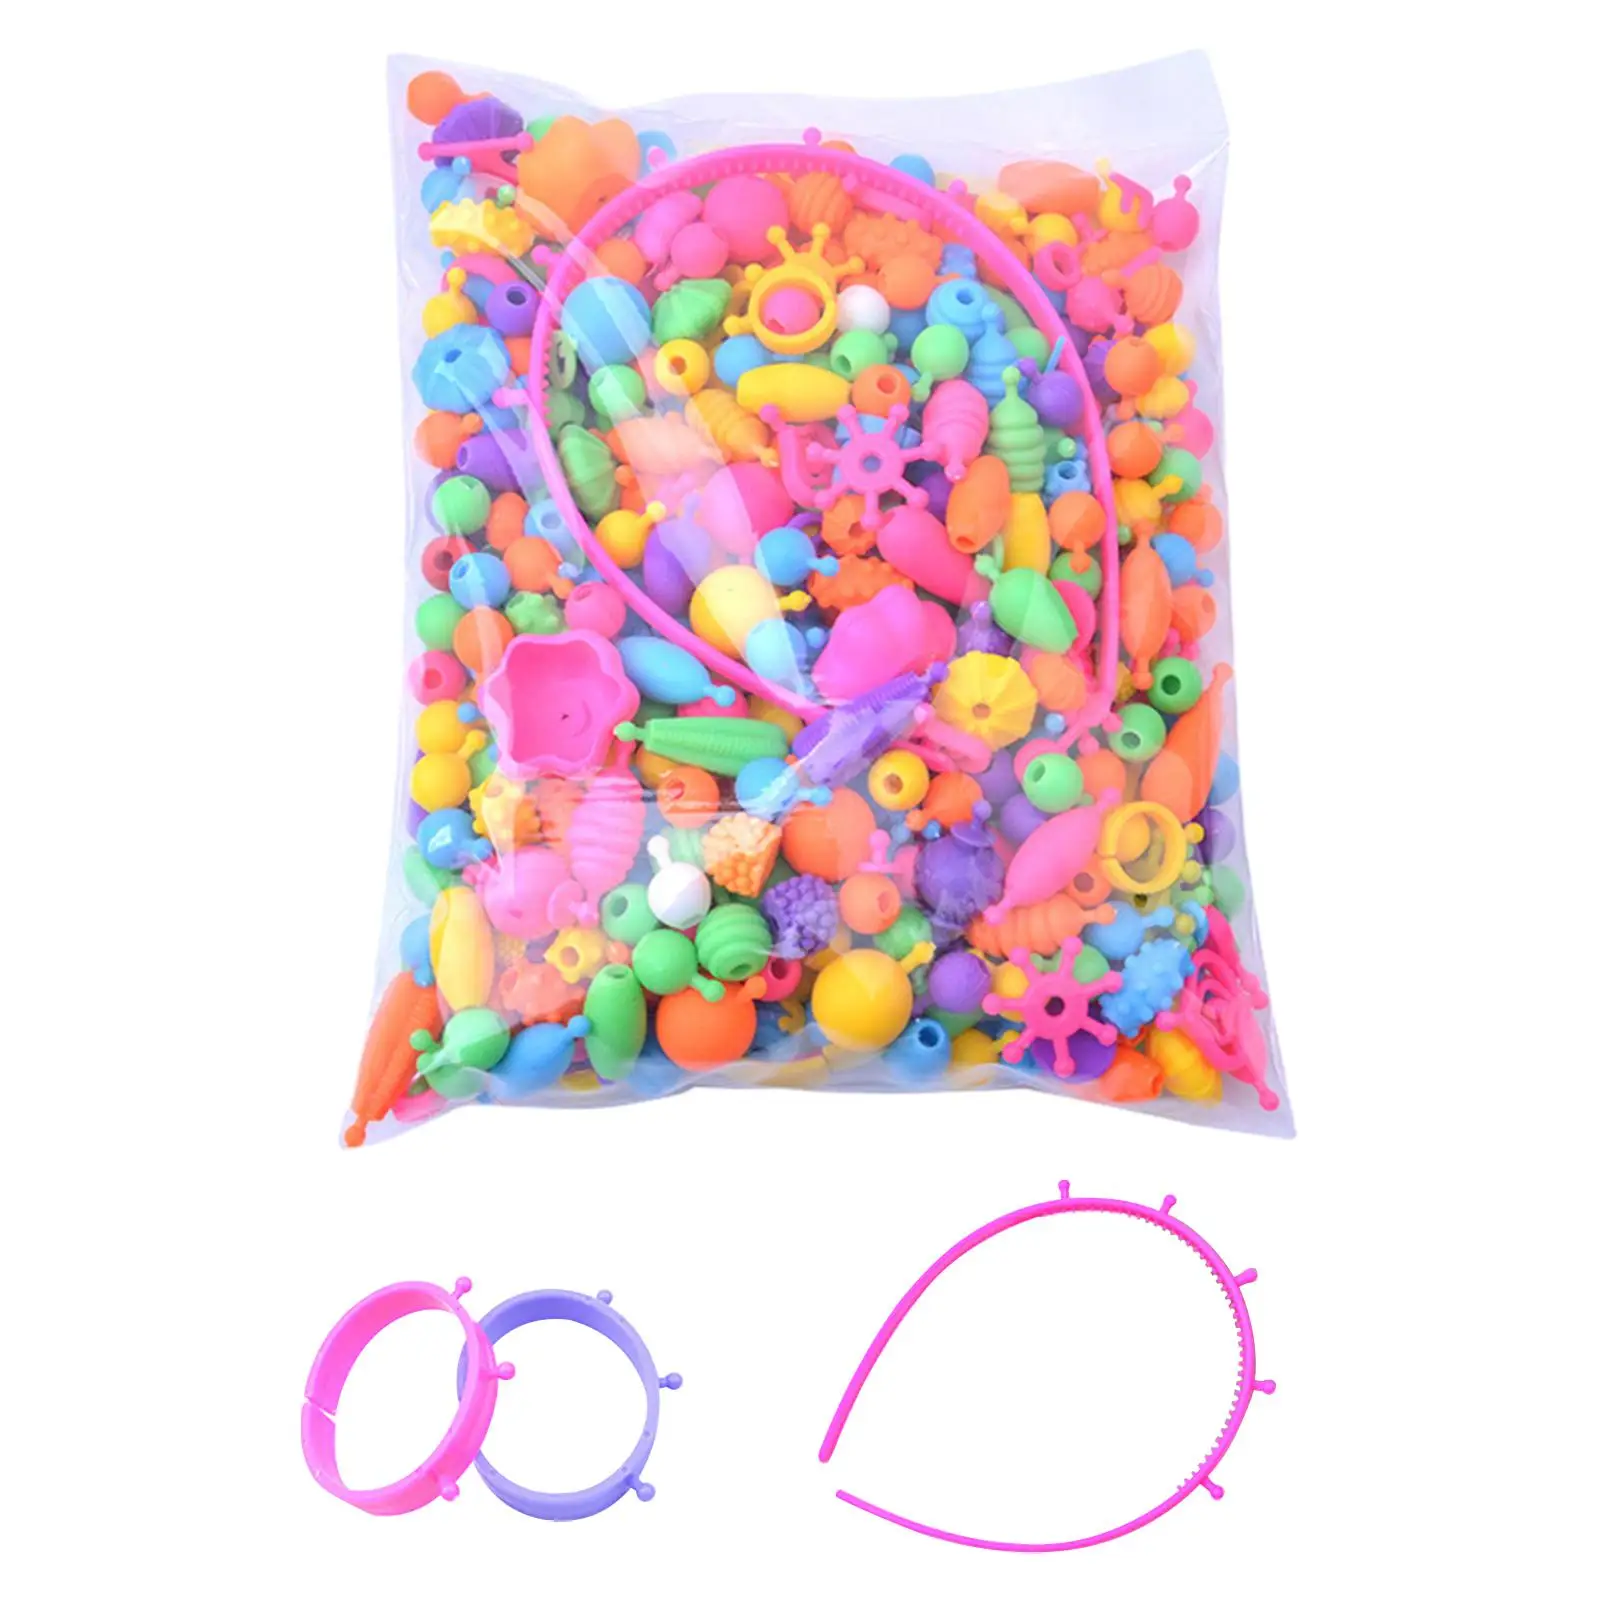 Beads Kids DIY Jewelry Making Kit Arts Toys Crafts Supplies Snap Together Beads for Earrings Hairband Necklace Gift Girls